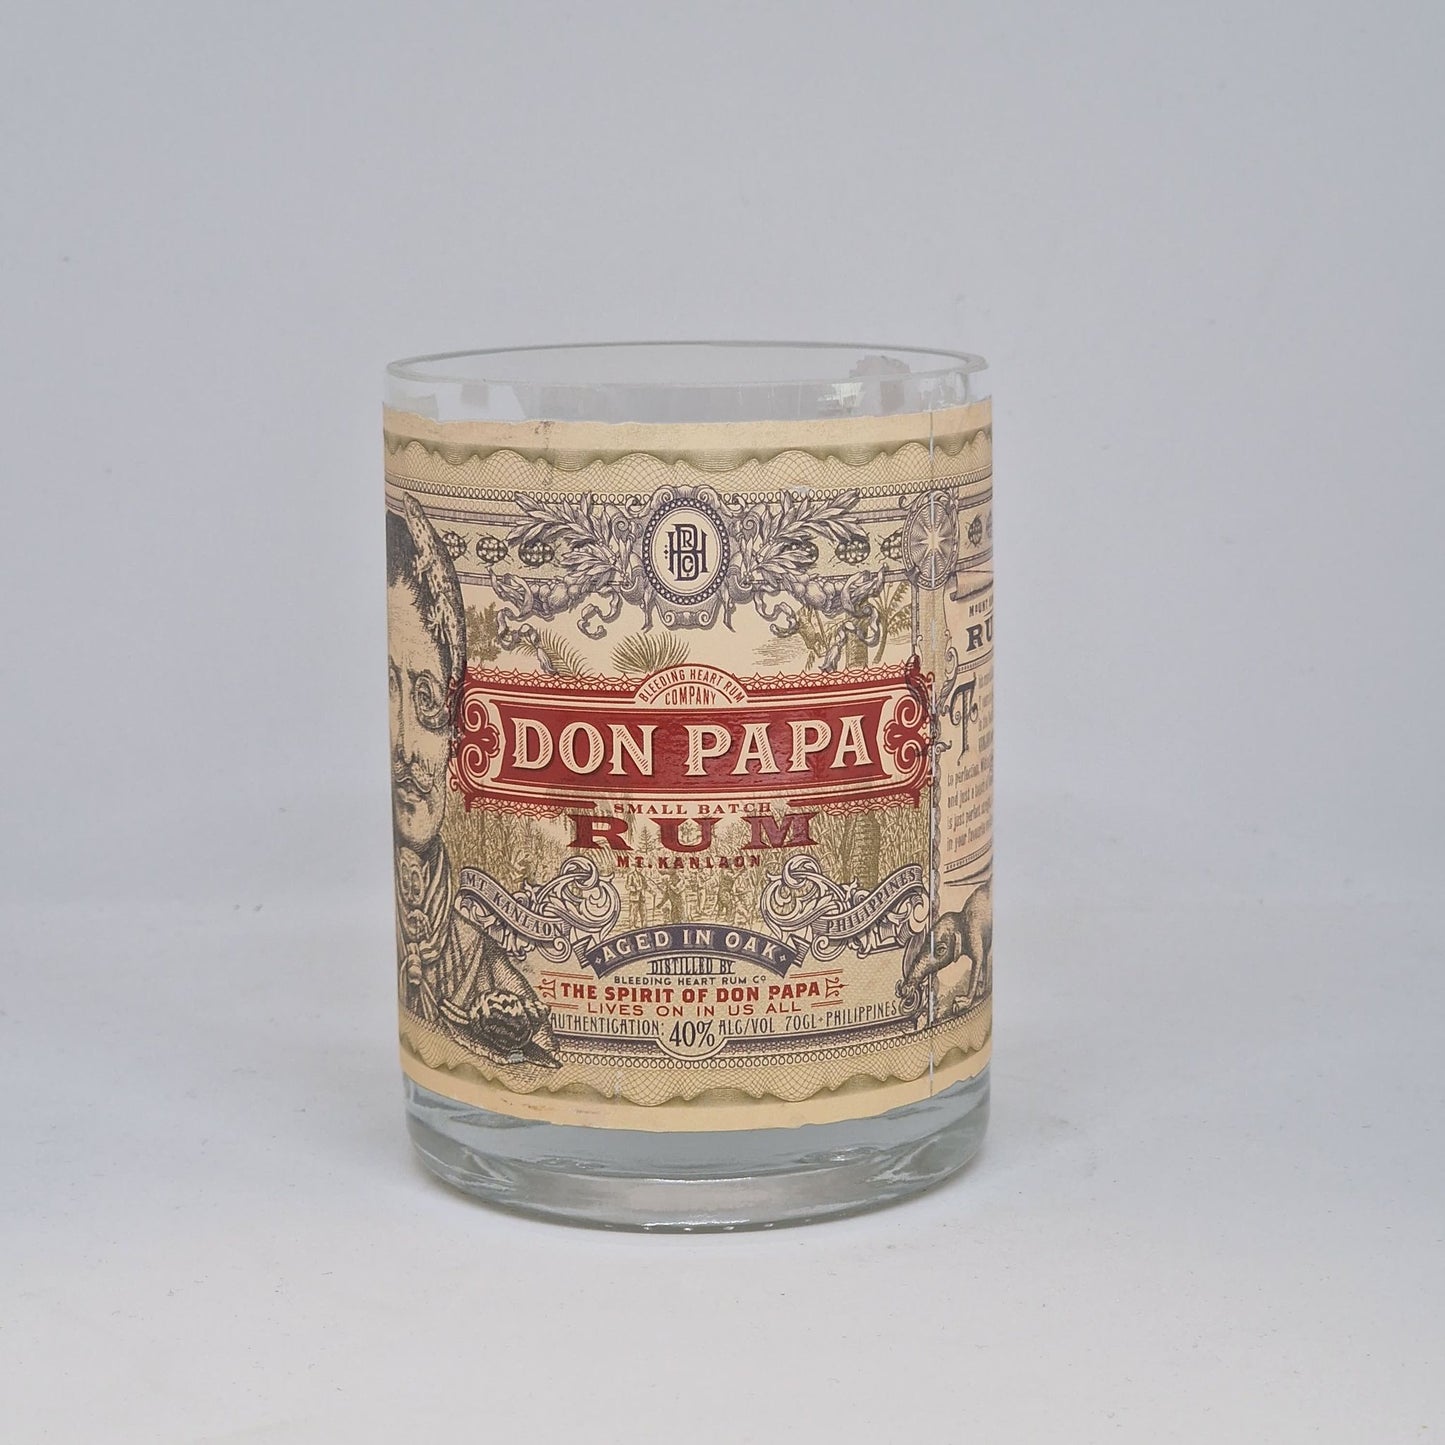 Don Papa Rum Bottle Candle